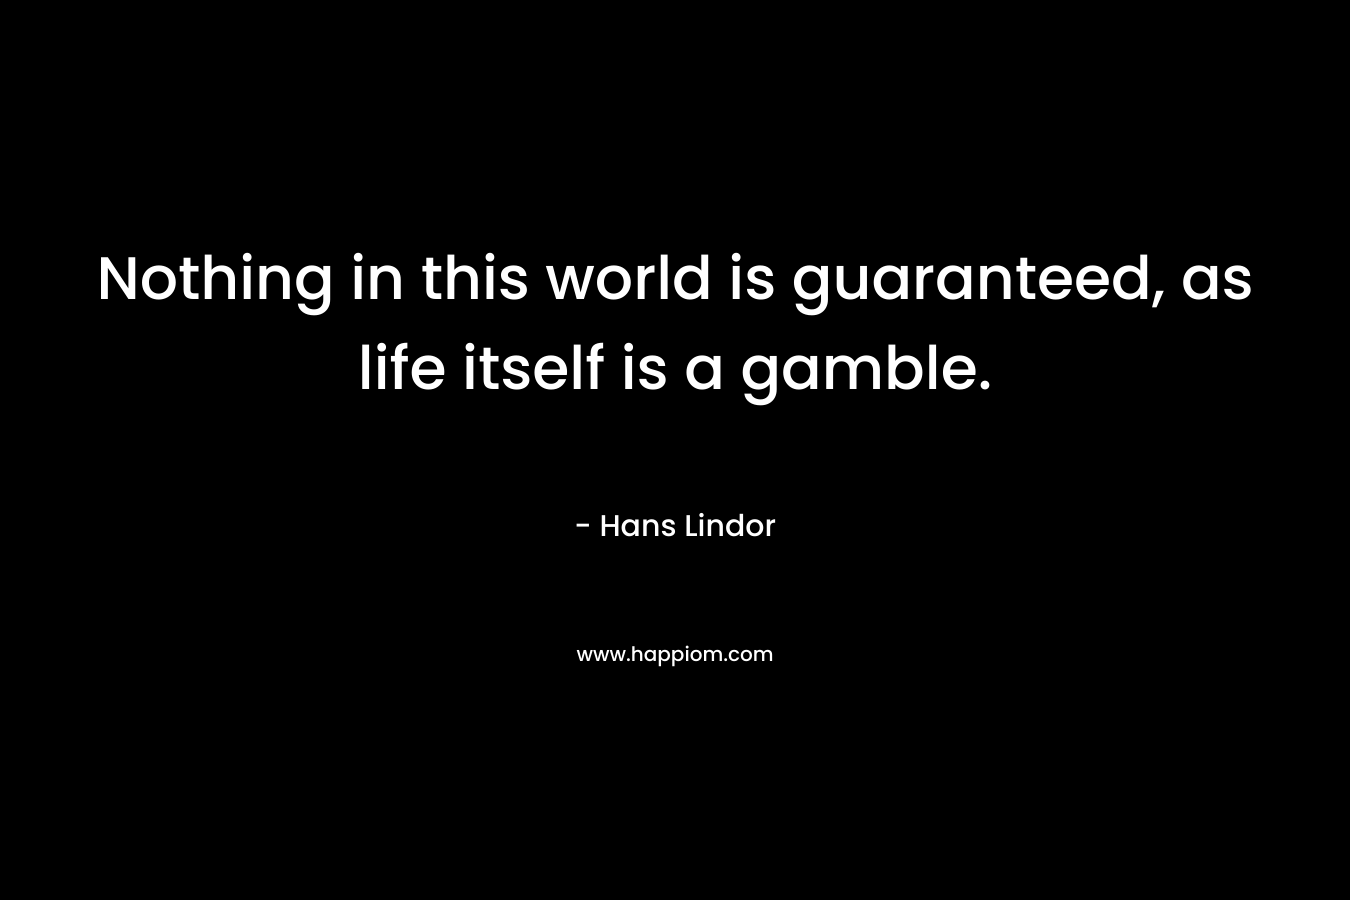 Nothing in this world is guaranteed, as life itself is a gamble.